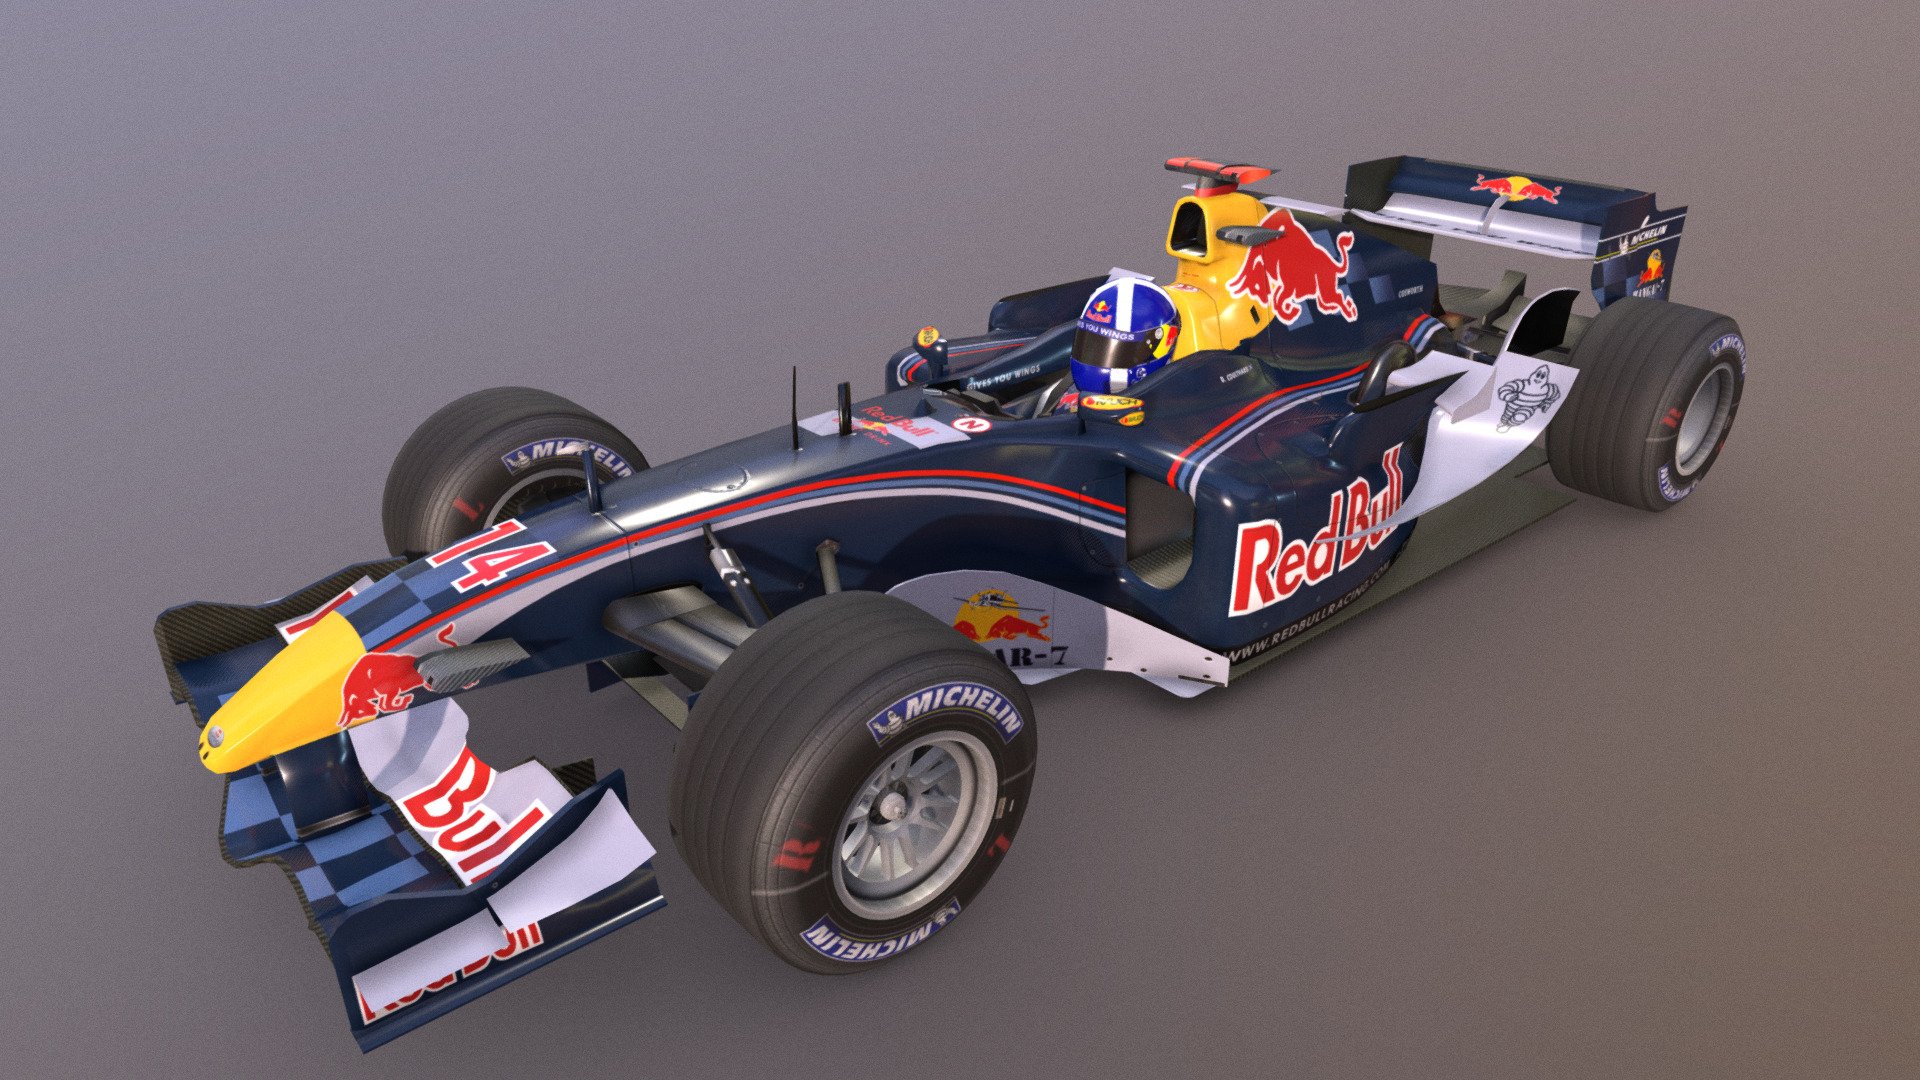 The car was initially created for CTDP's F1 2005 mod for F1 Challenge and later also re-released for rFactor in 2006.

Read more about the model - Red Bull Racing RB1 (2005) - 3D model by Cars & Tracks Development Project (@ctdp) 3d model